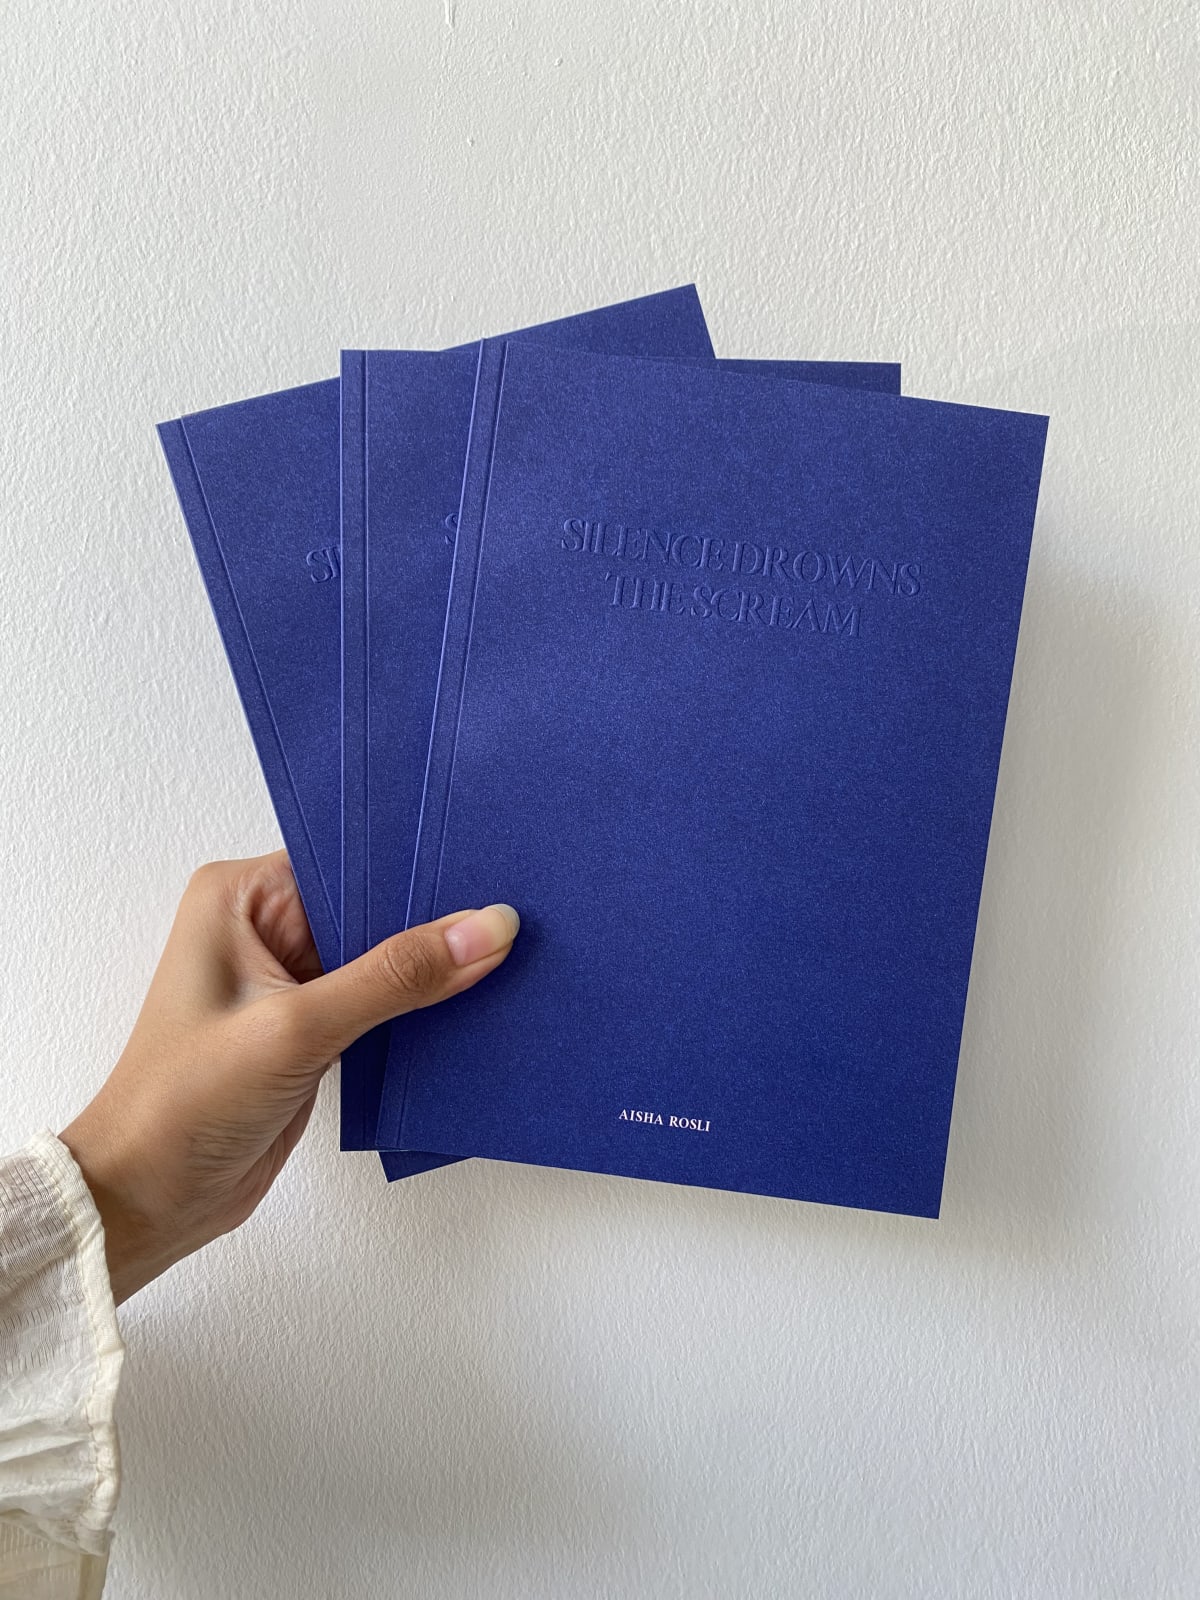 Aisha Rosli's exhibition booklets are all ready, come get your own copy at the gallery!